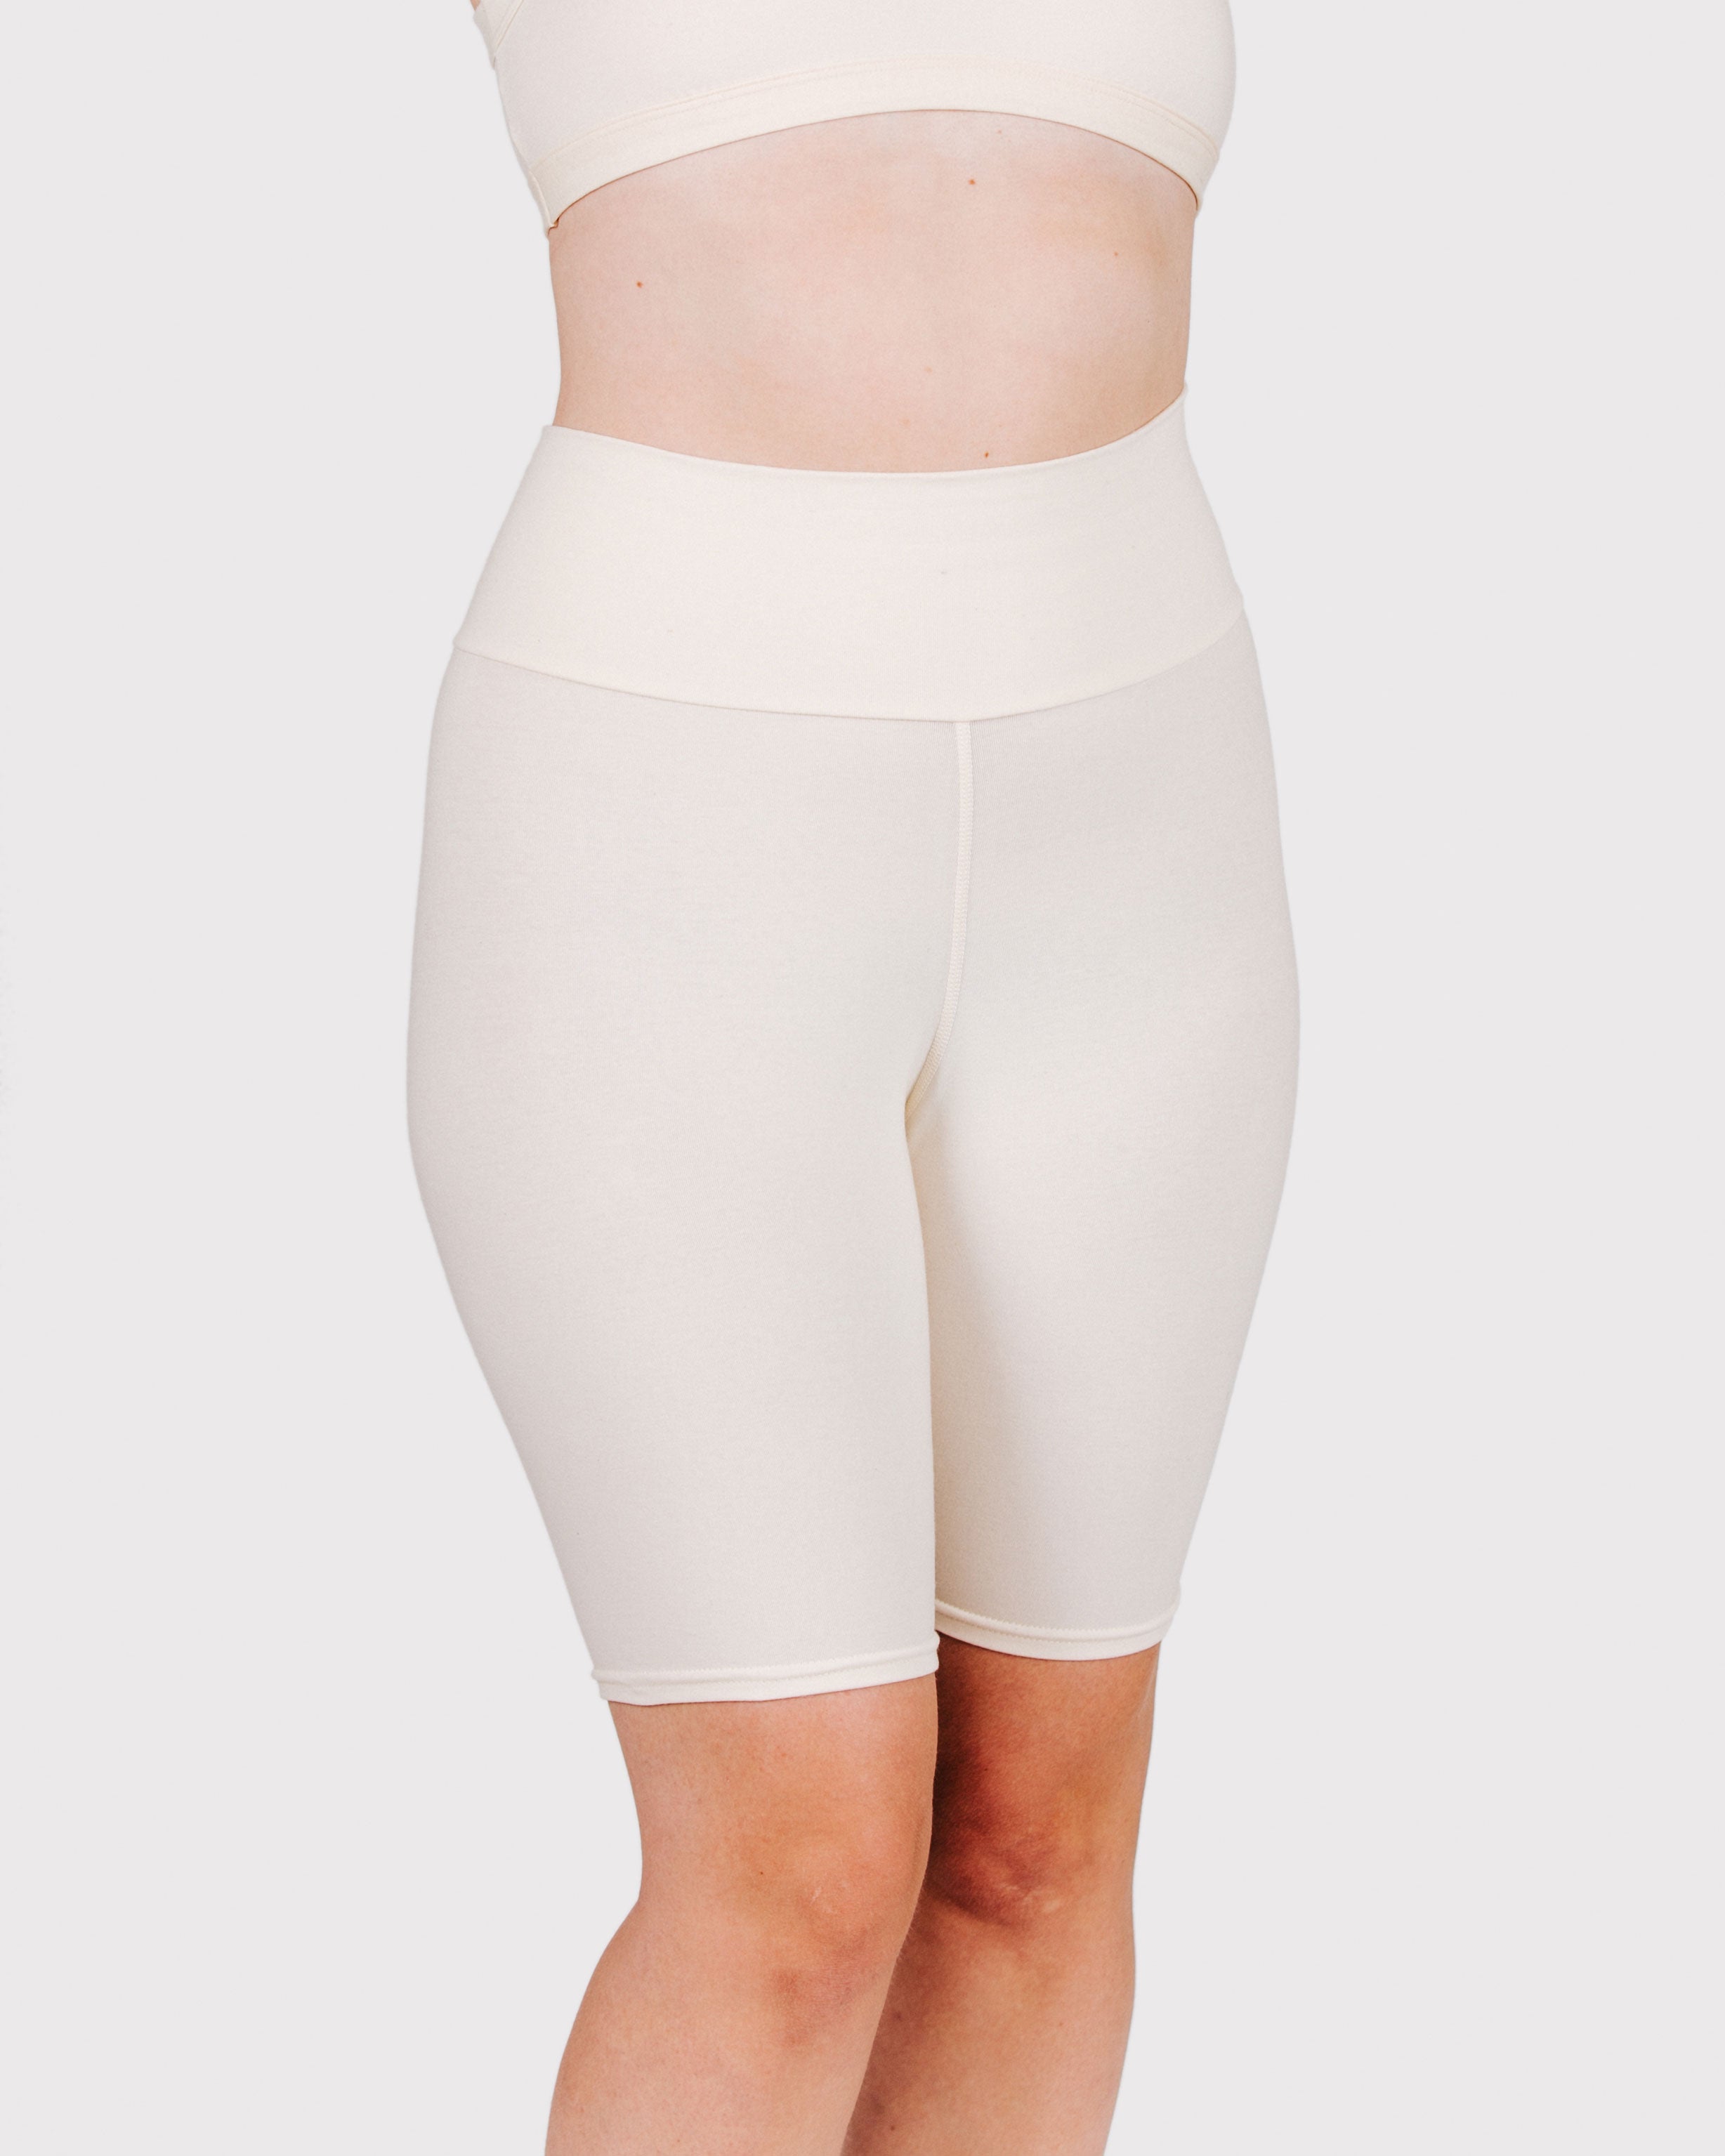 Fit photo from the front of Thunderpants organic cotton Bike Shorts in off-white on a model.